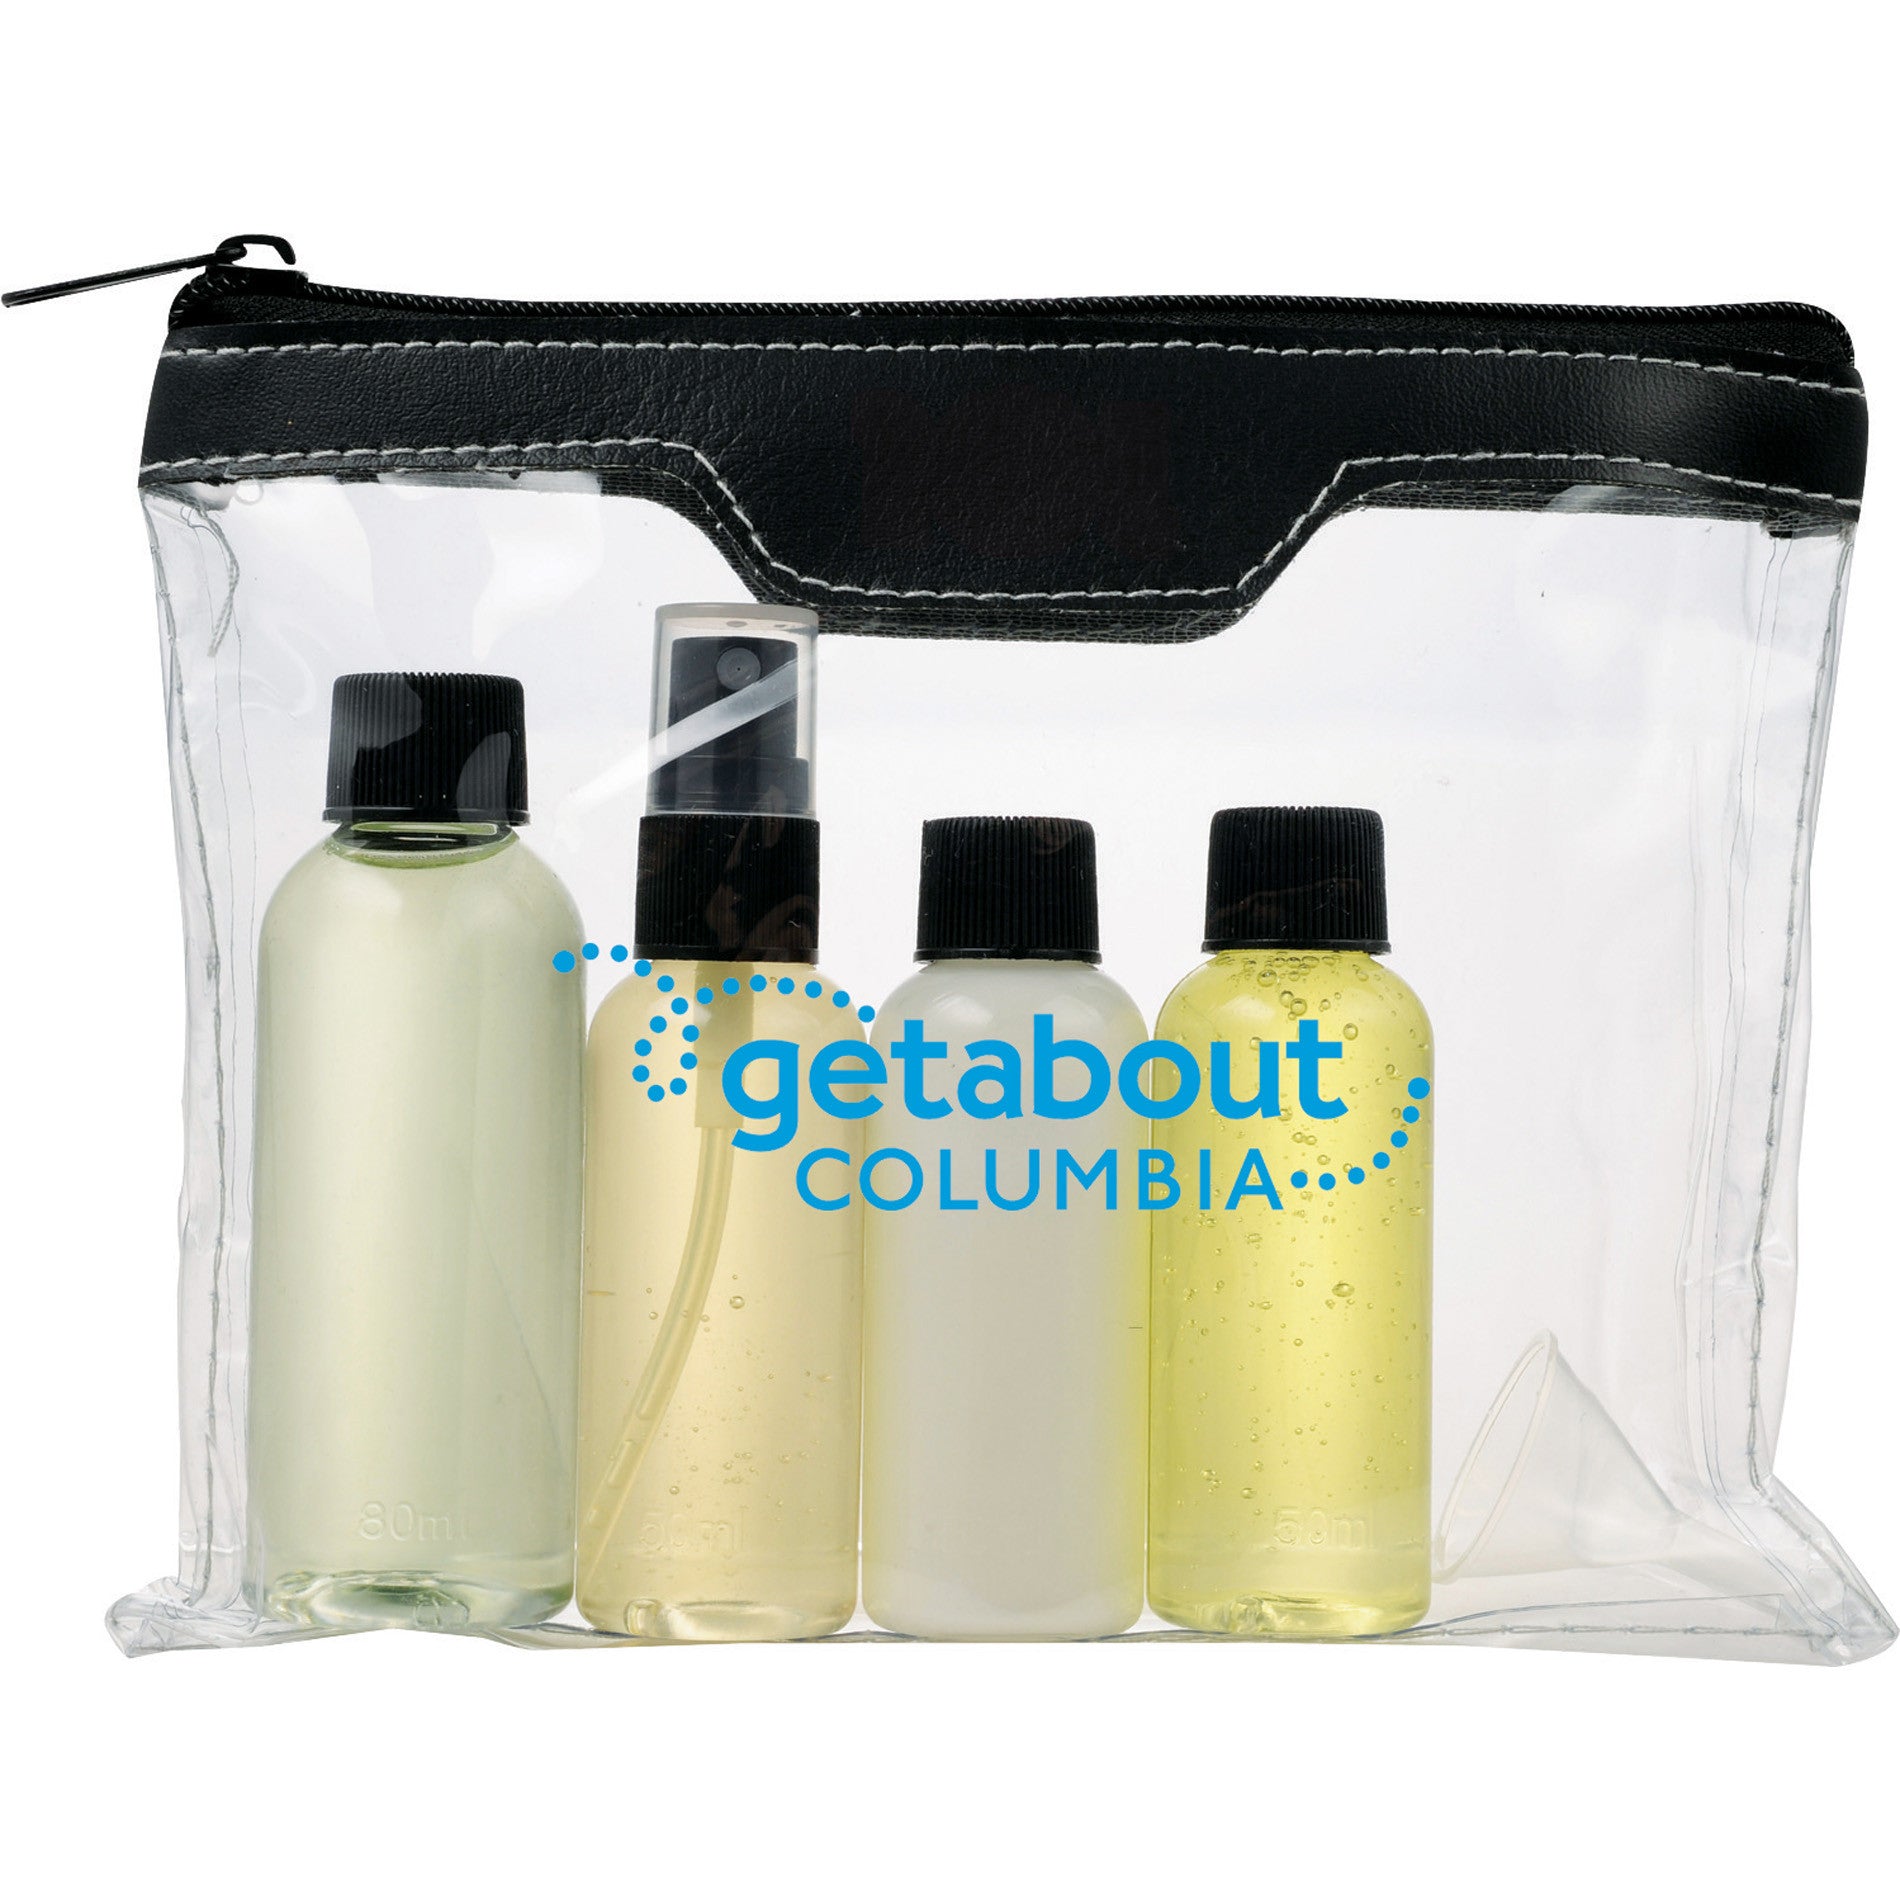 Clear Vinyl Travel Size Cosmetic Bag